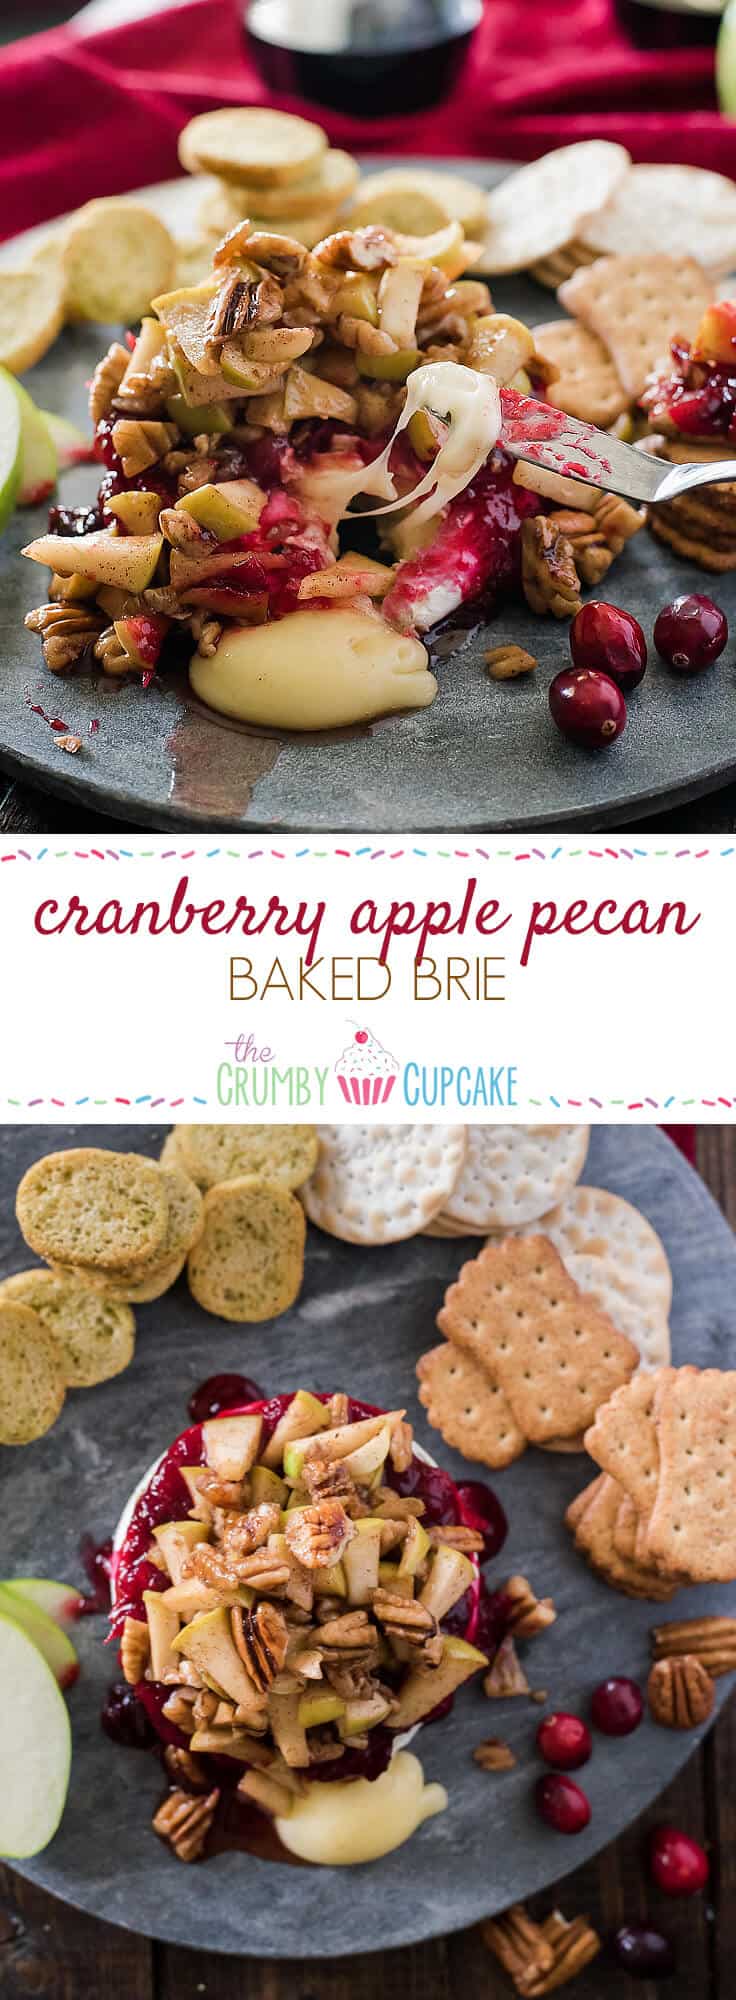 This simple Cranberry Apple Pecan Baked Brie combines tart, sweet, and savory to create an elegant holiday crowd pleaser!